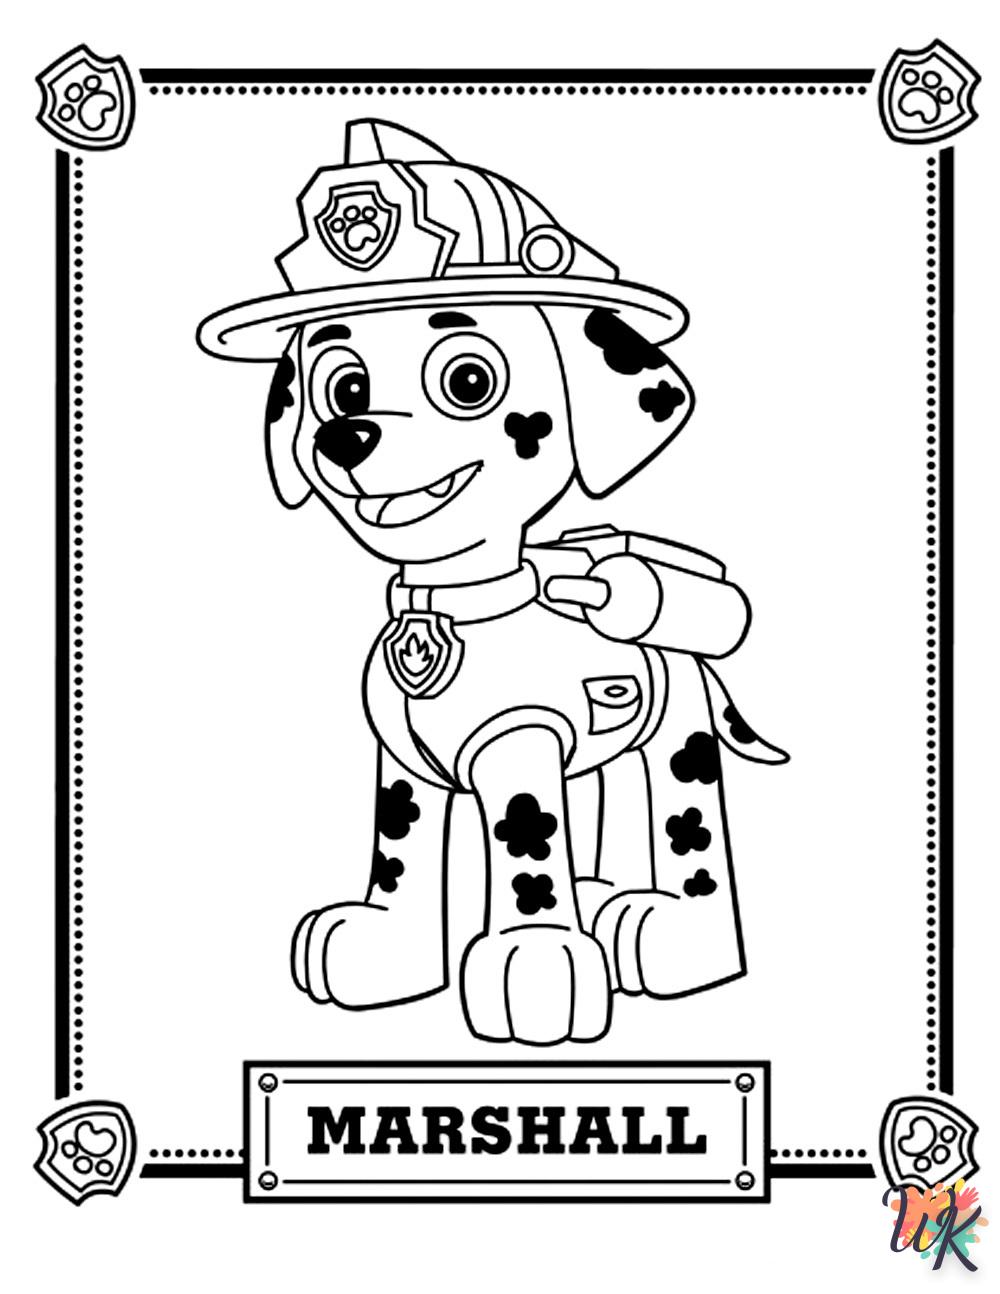 printable Paw Patrol coloring pages for adults